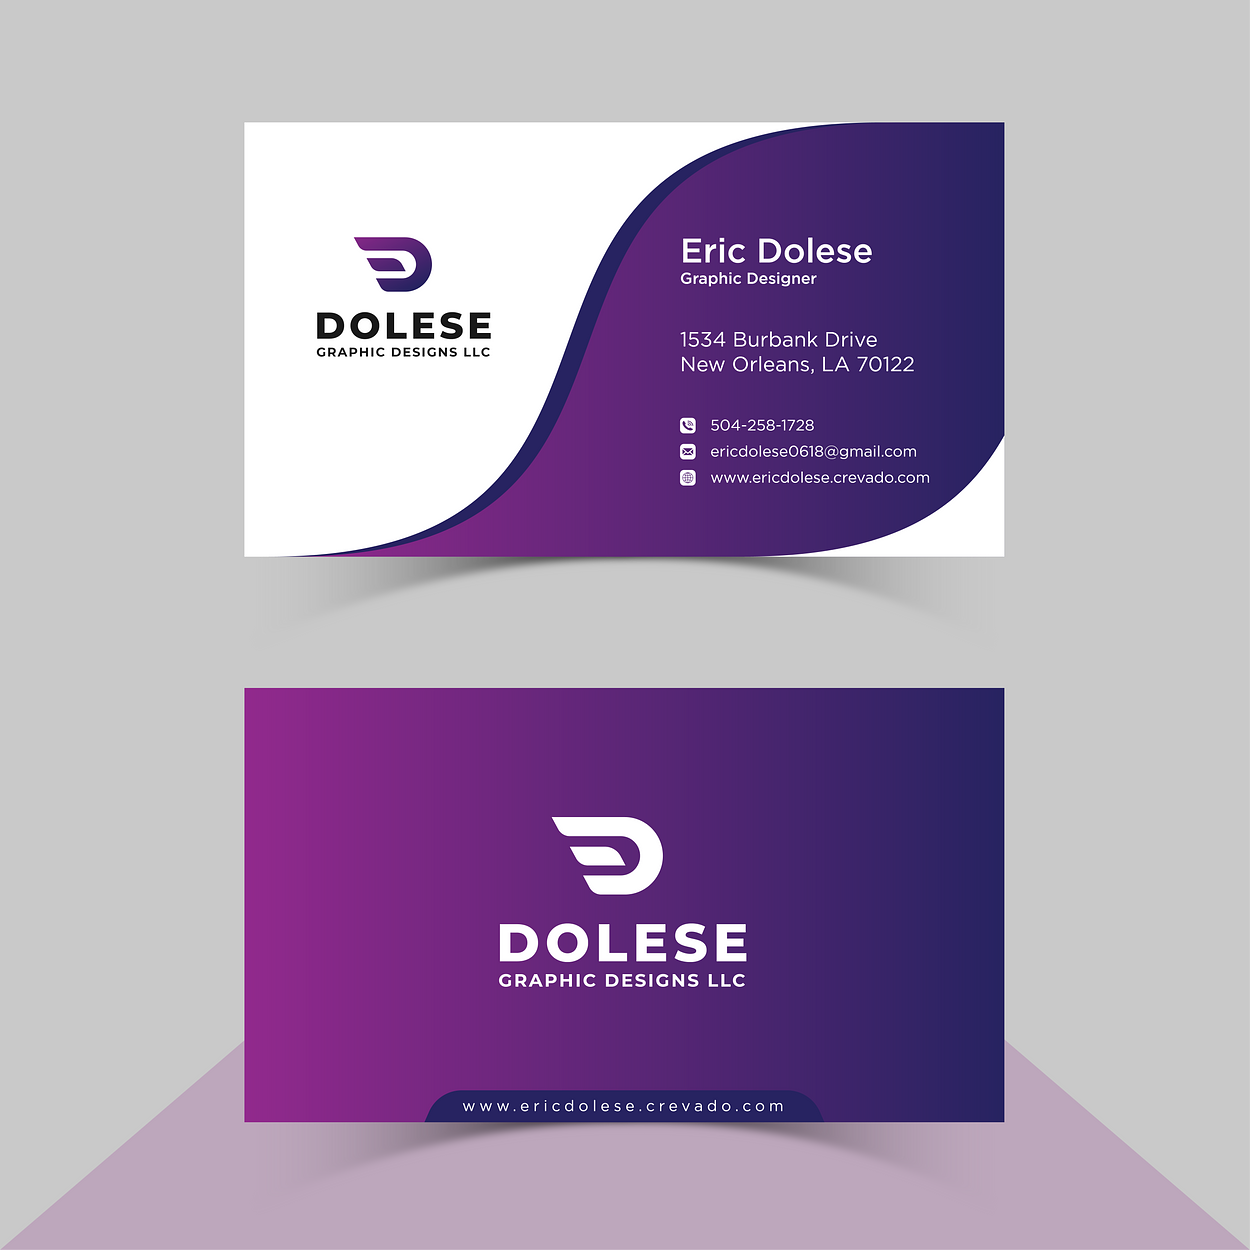 Dolese Graphic Designs LLC Business Card